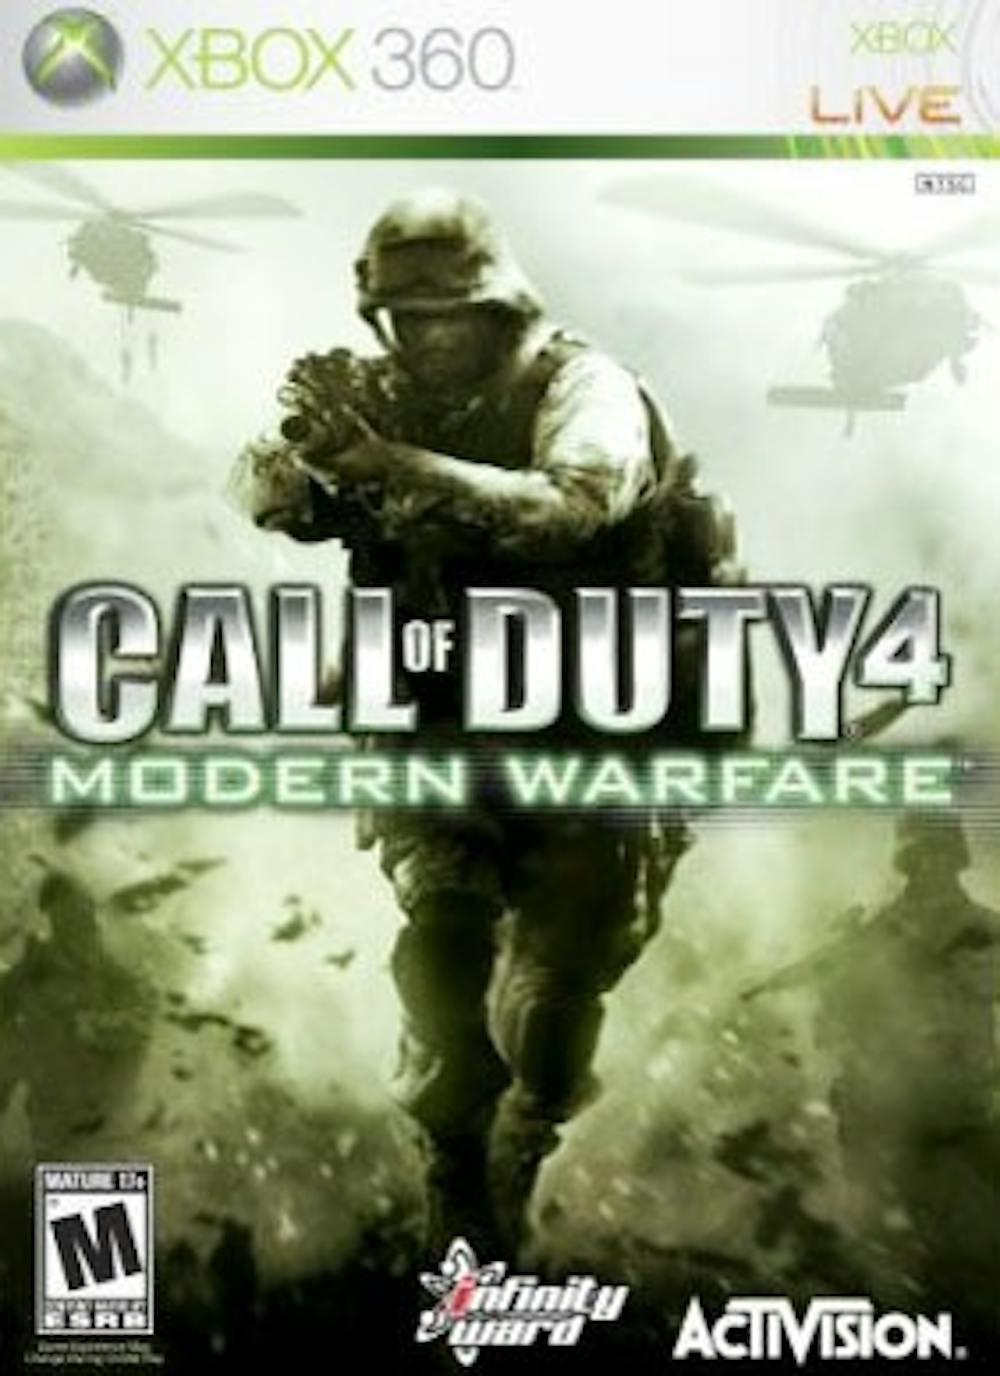 'Call of Duty 4' an authentic experience of modern warfare